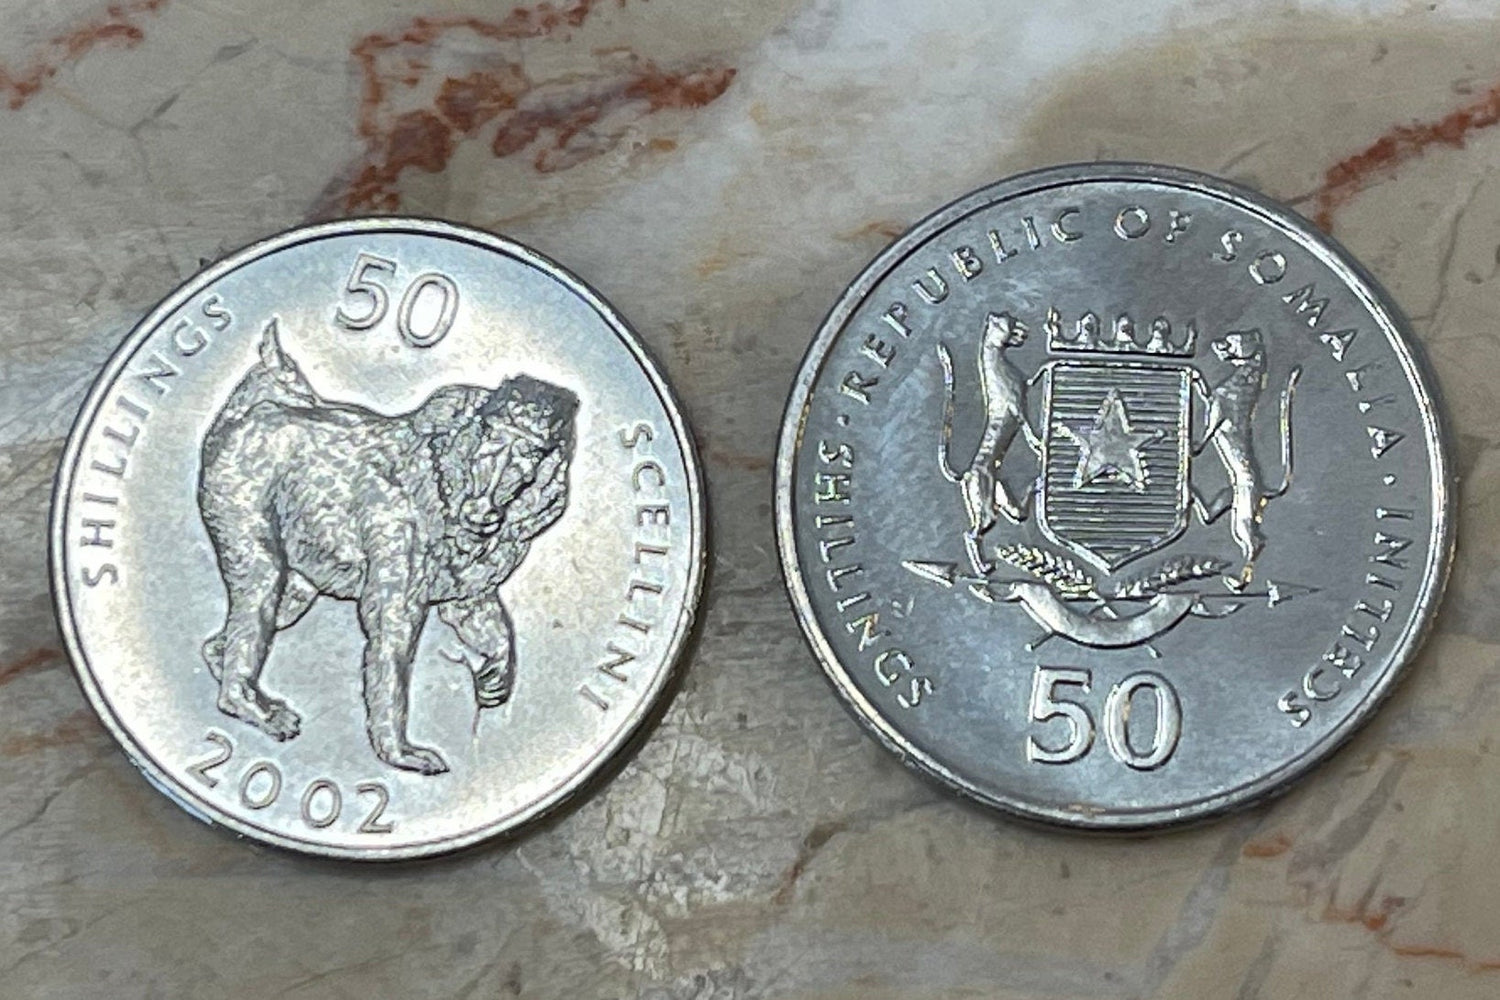 Mandrill 50 Shillings Somalia Authentic Coin Money for Jewelry and Craft Making